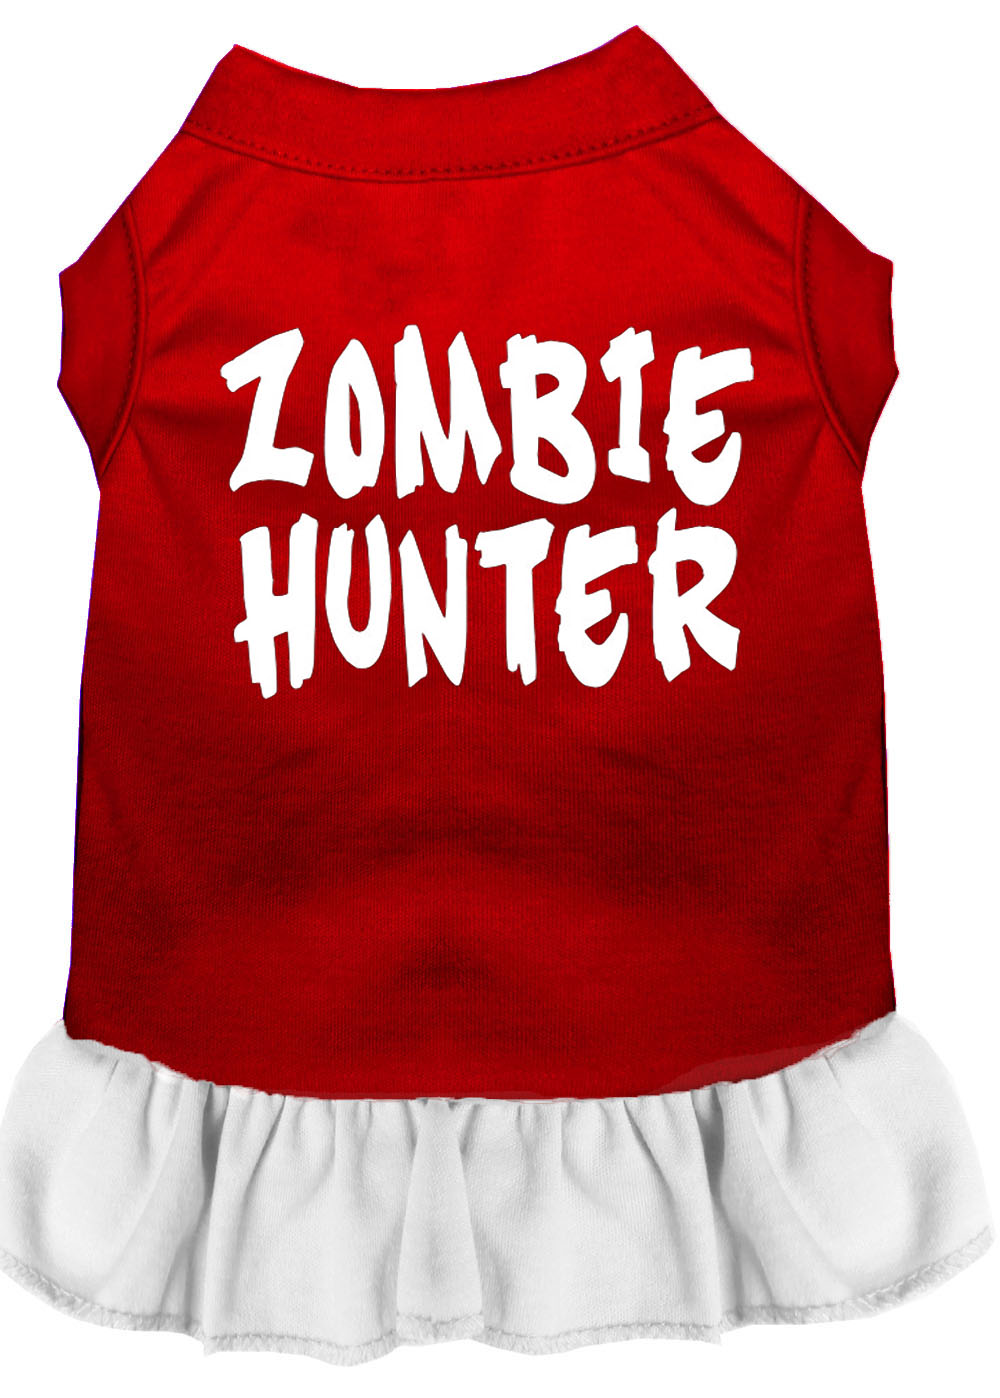 Zombie Hunter Screen Print Dress Red with White Lg